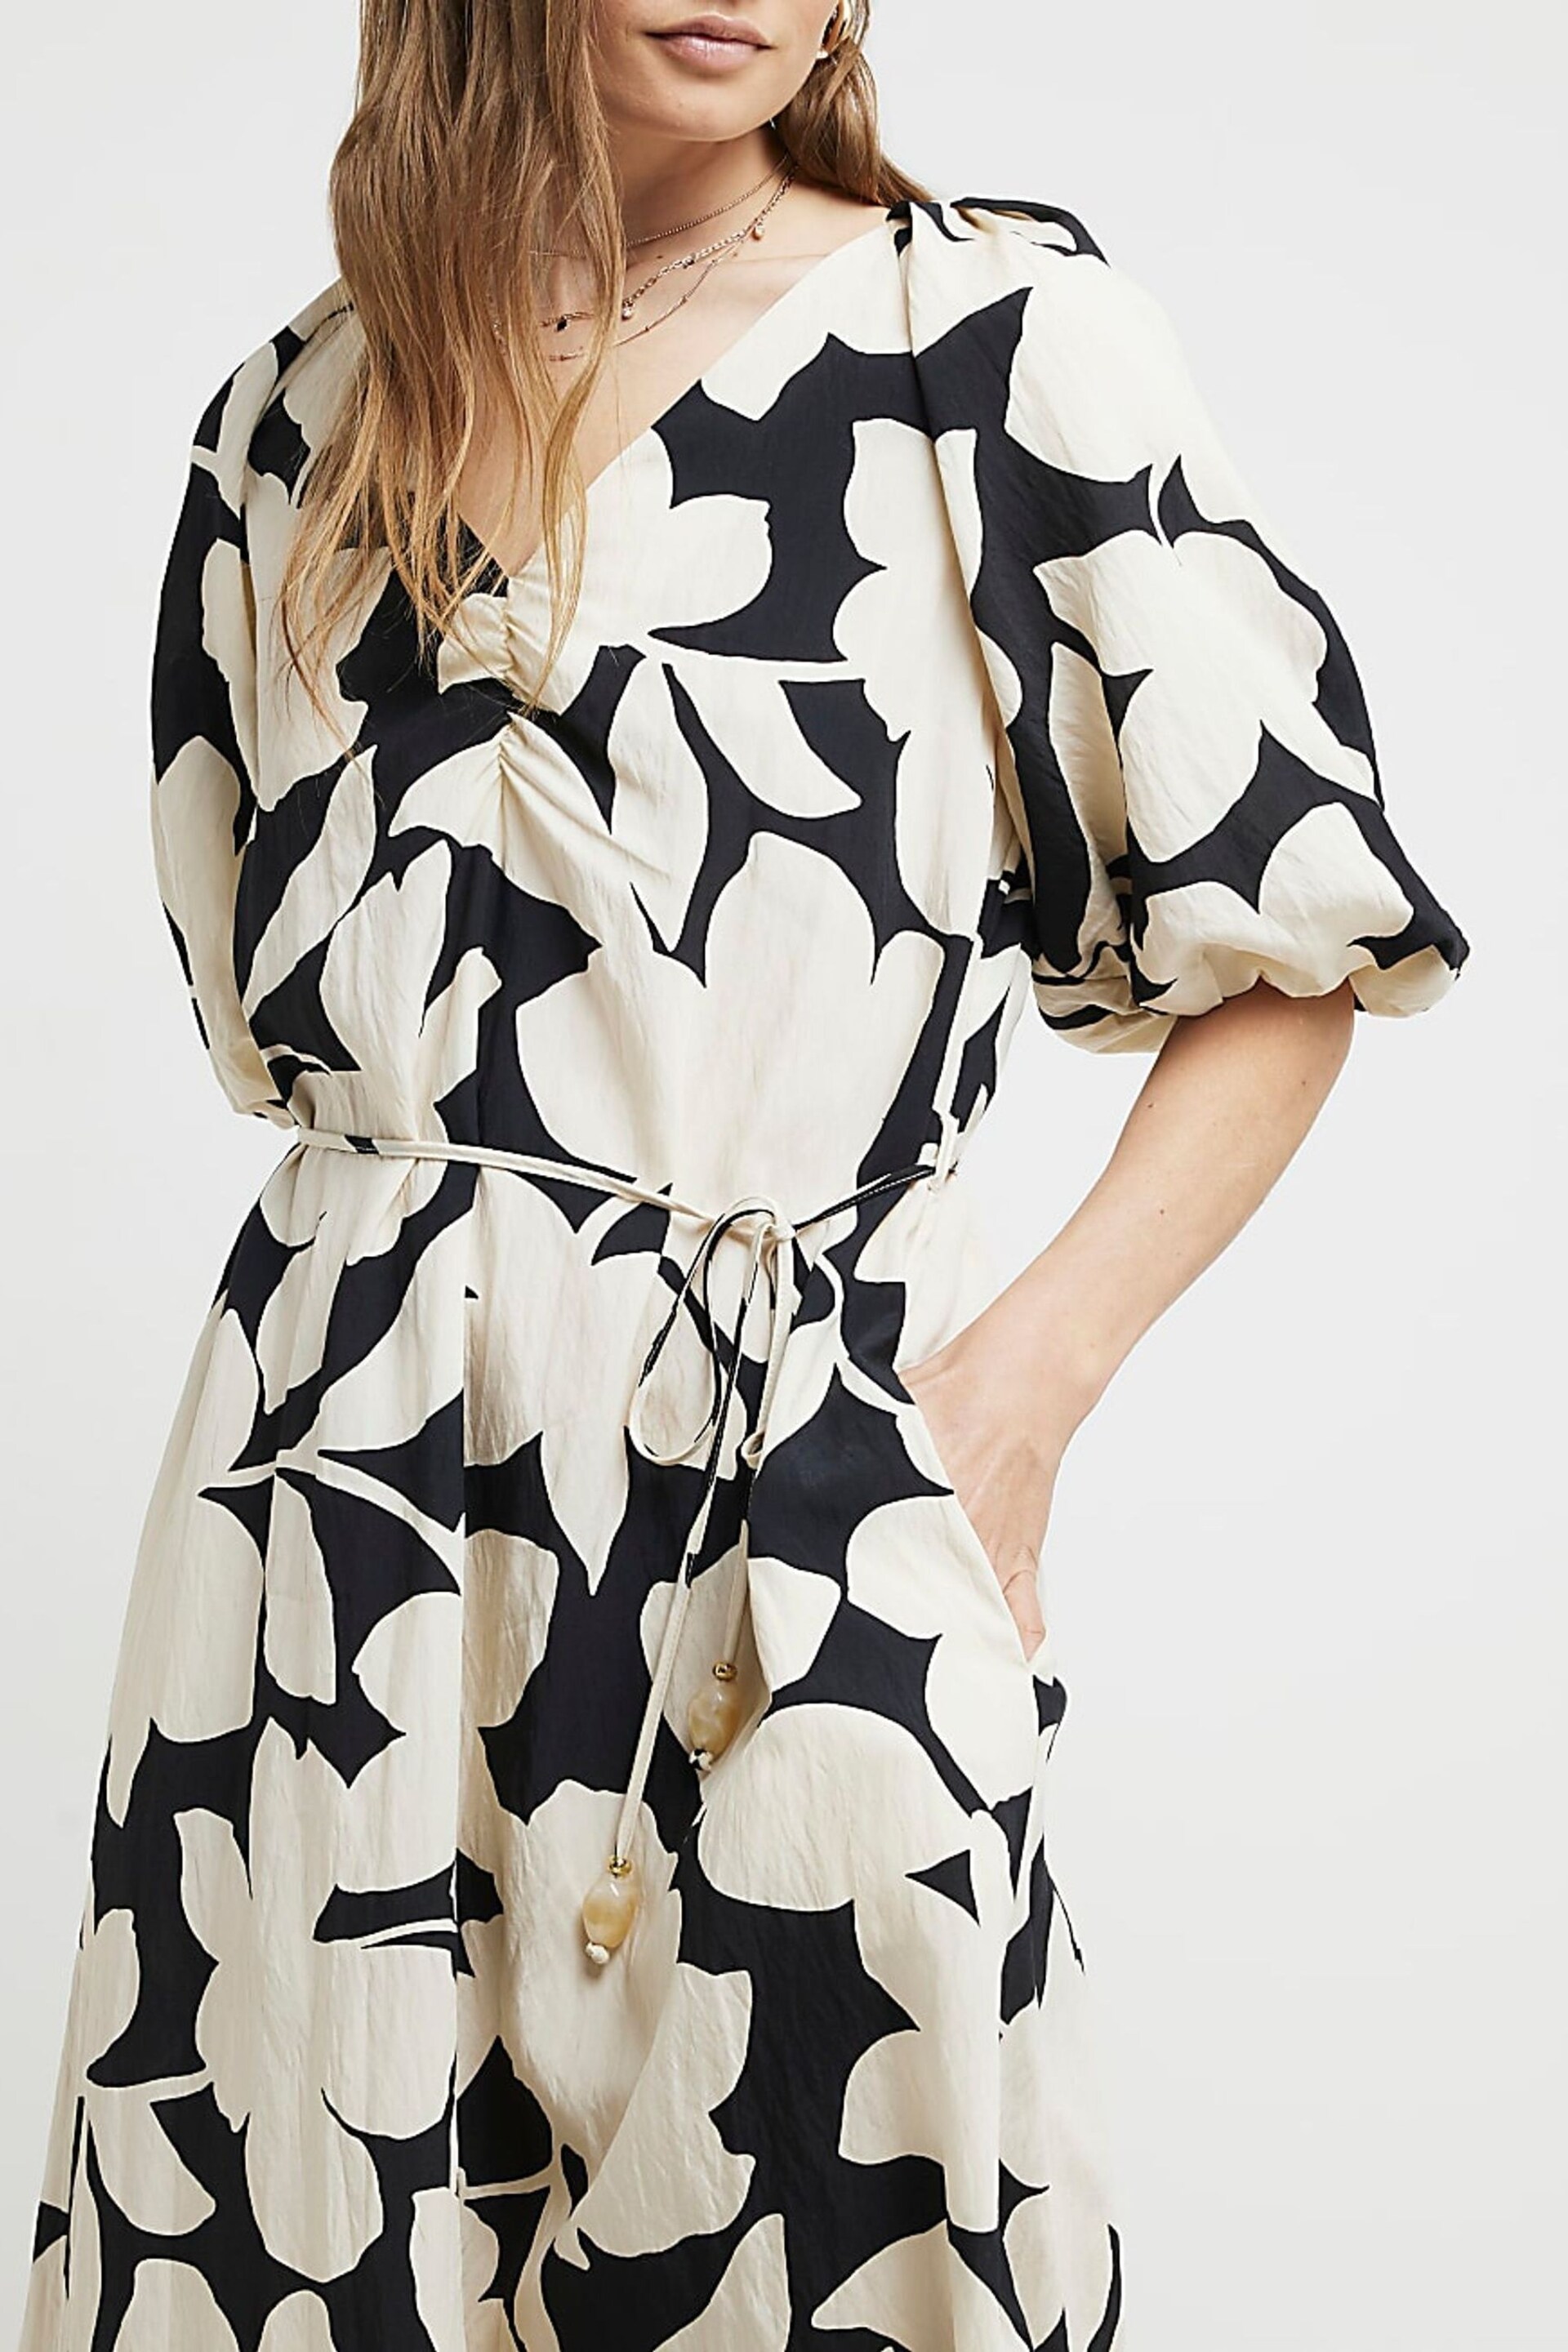 River Island Black Puff Sleeve Belted Dress - Image 4 of 7